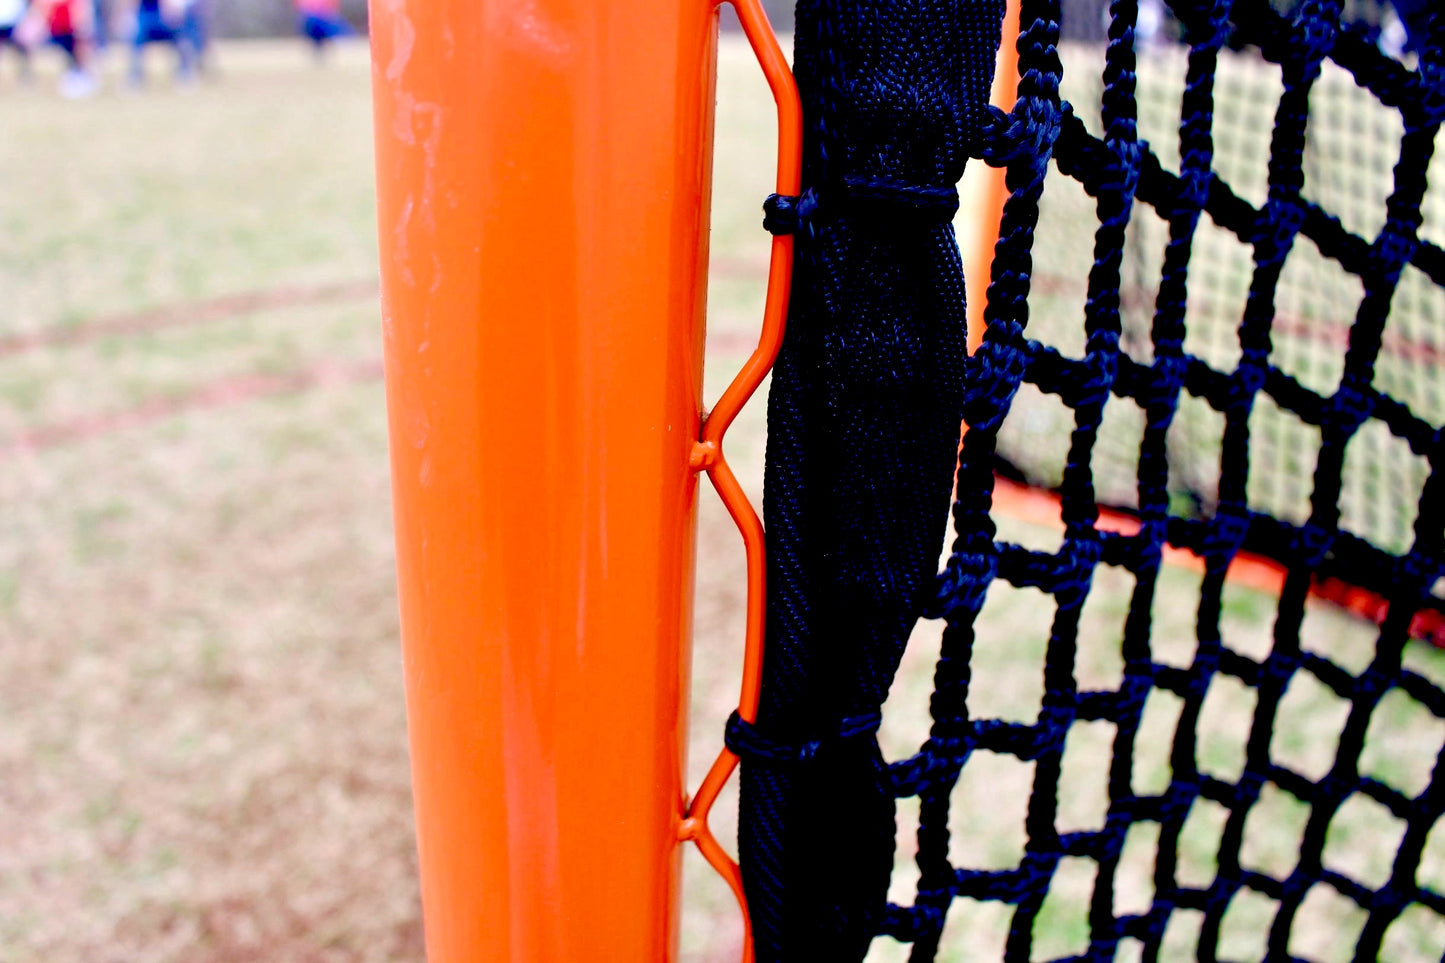 High School/College Game Goal 6'x6'x7' by Crankshooter® 118 lbs. Posts w/ Lacing Rails & Flat Iron Base, Heavy 6mm or 7mm Black Net Included - Free Shipping